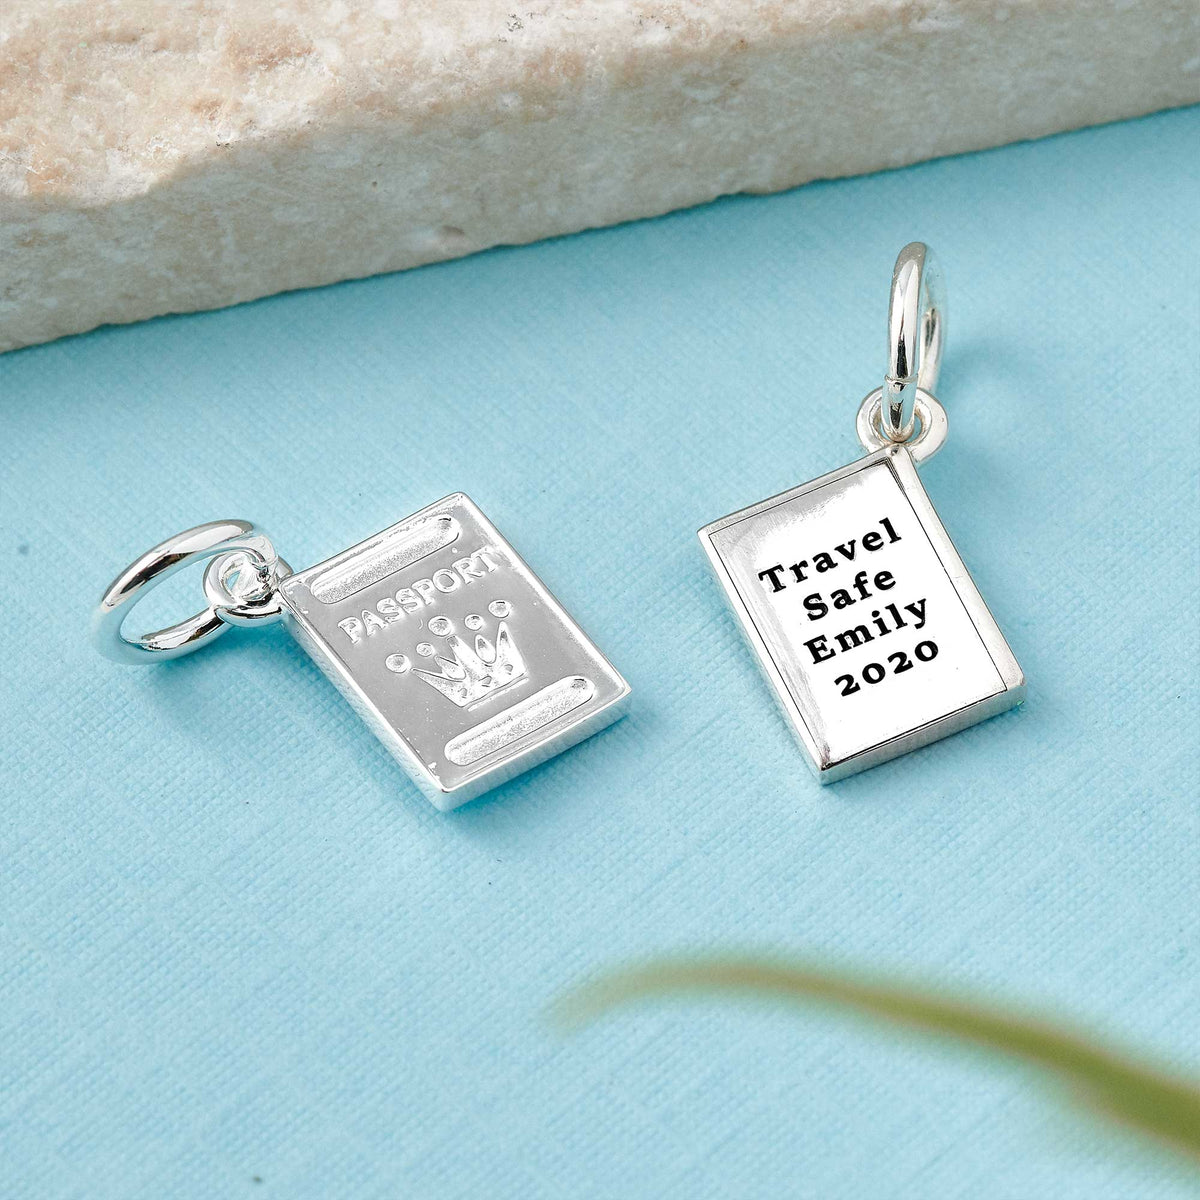 always stay safe silver passport charm travel gift ideas for daughter granddaughter